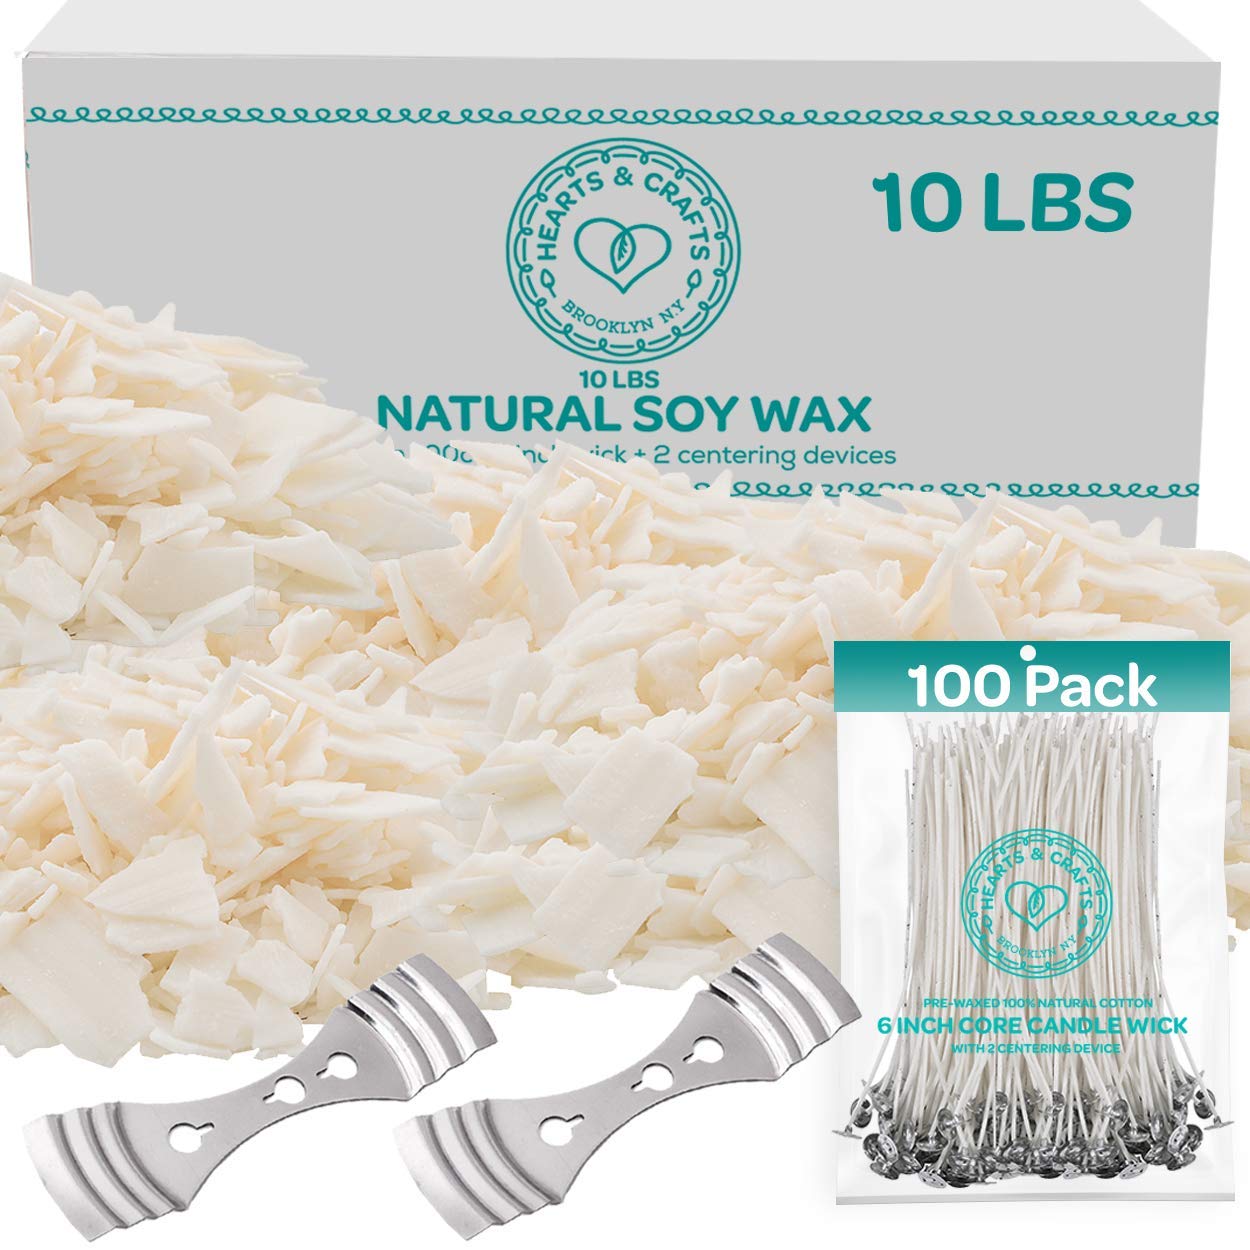 Hearts & Crafts Natural Soy Wax - Candle Making Wax Supplies - 4.5kg Soy Wax, 100 15cm Pre-Waxed Candle Wicks, & 2 Metal Centering Devices - Soy Wax Flakes for Candle Making - Soy Candle Wax Bulk  - Like New